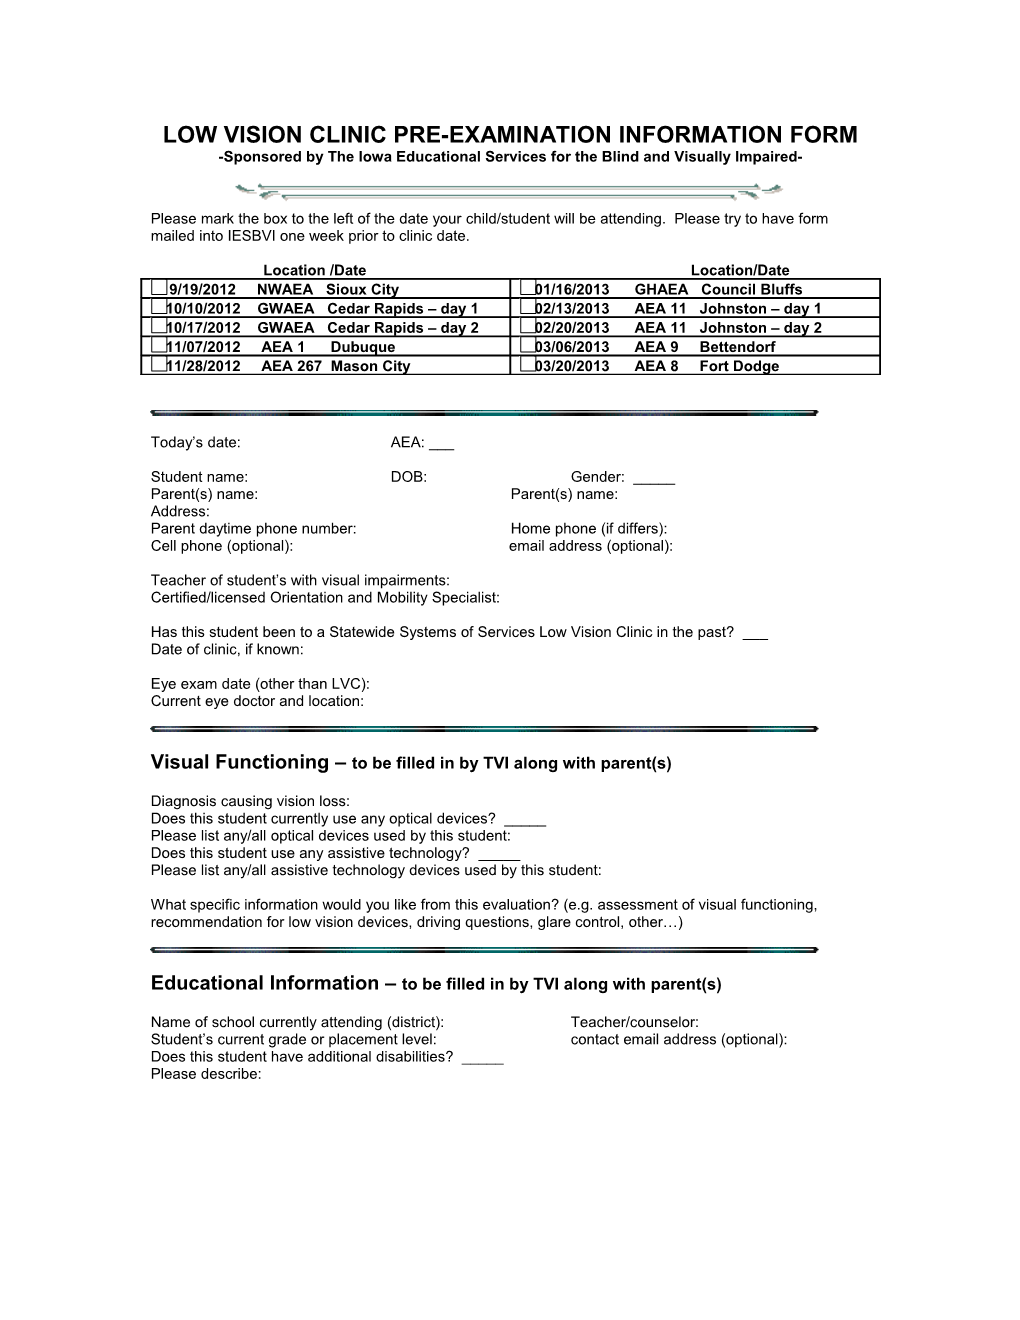 Low Vision Clinic Pre-Examination Information Form